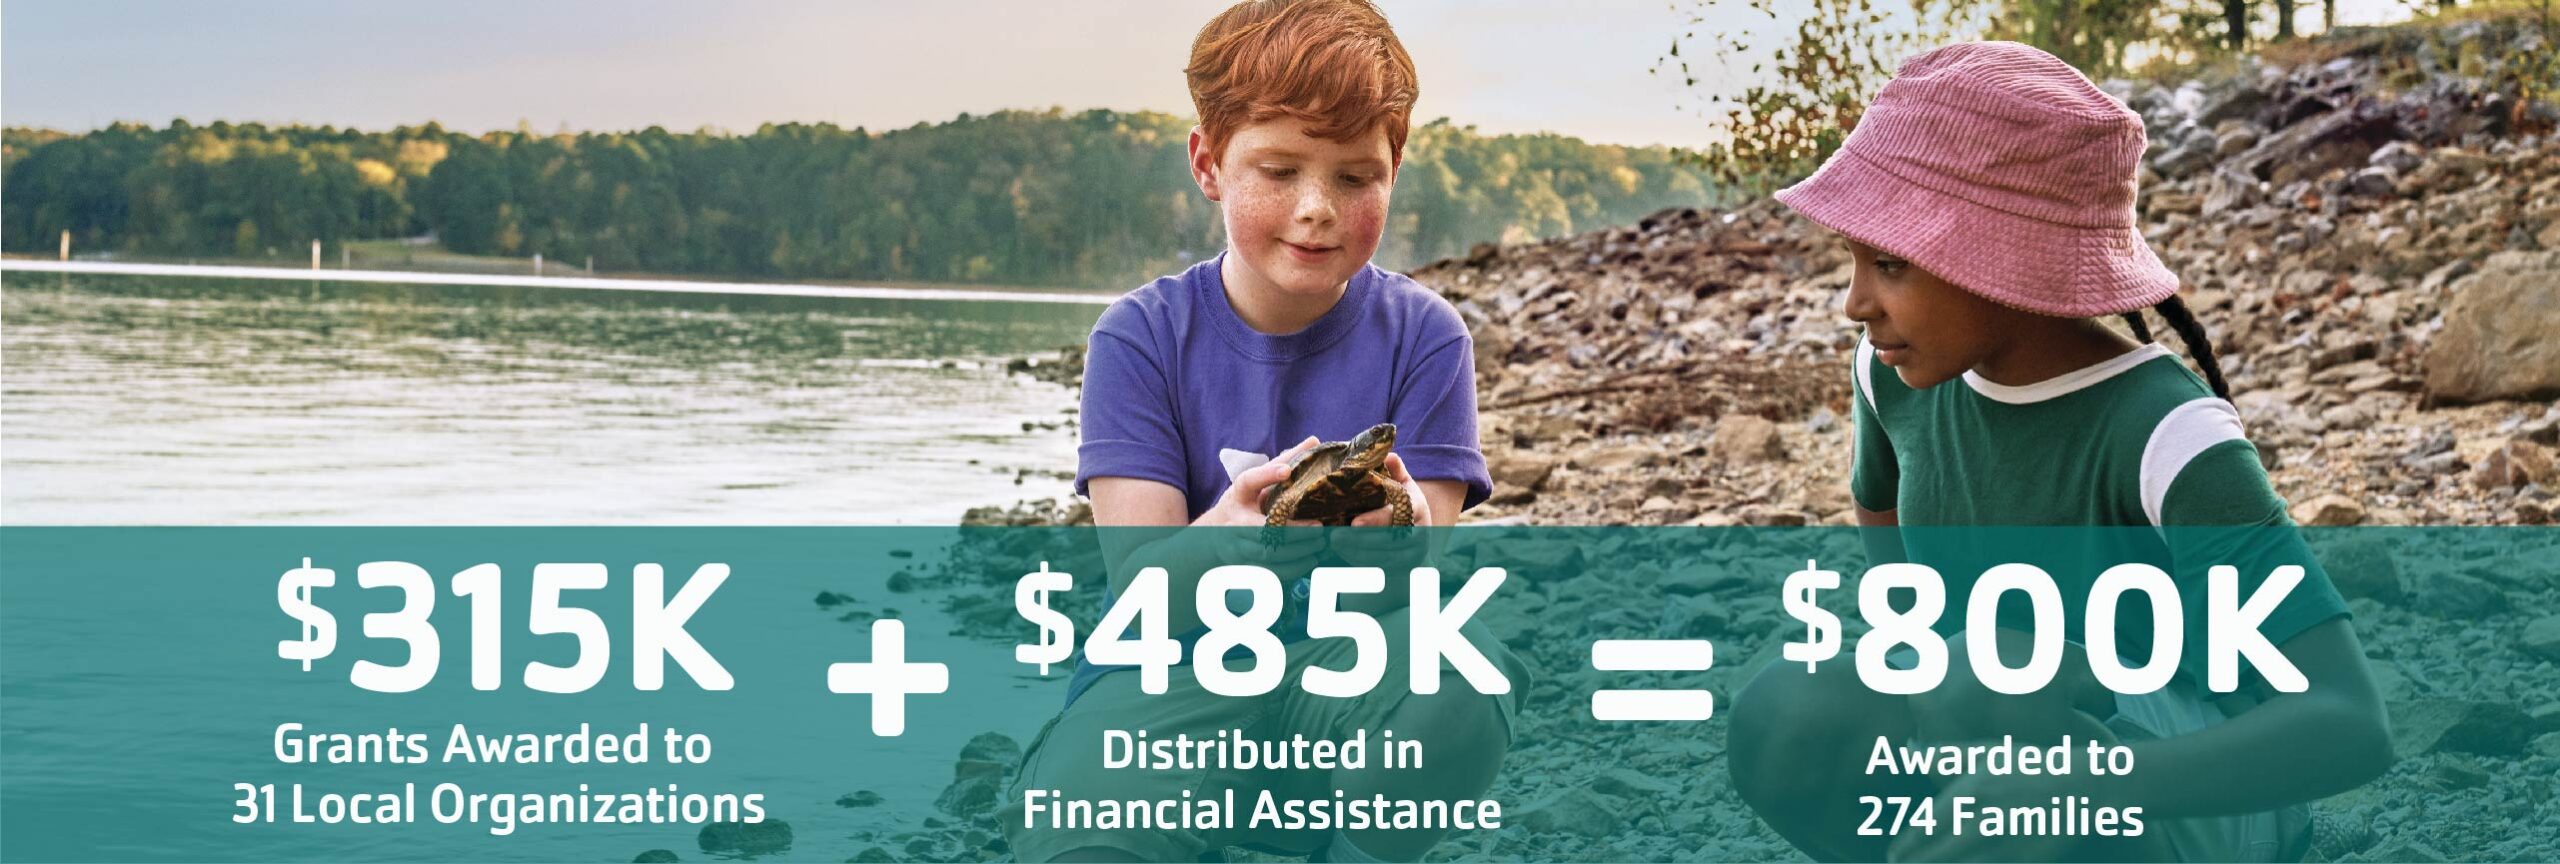 Our impact webpage at the Westport Weston Family YMCA Financial Assistance